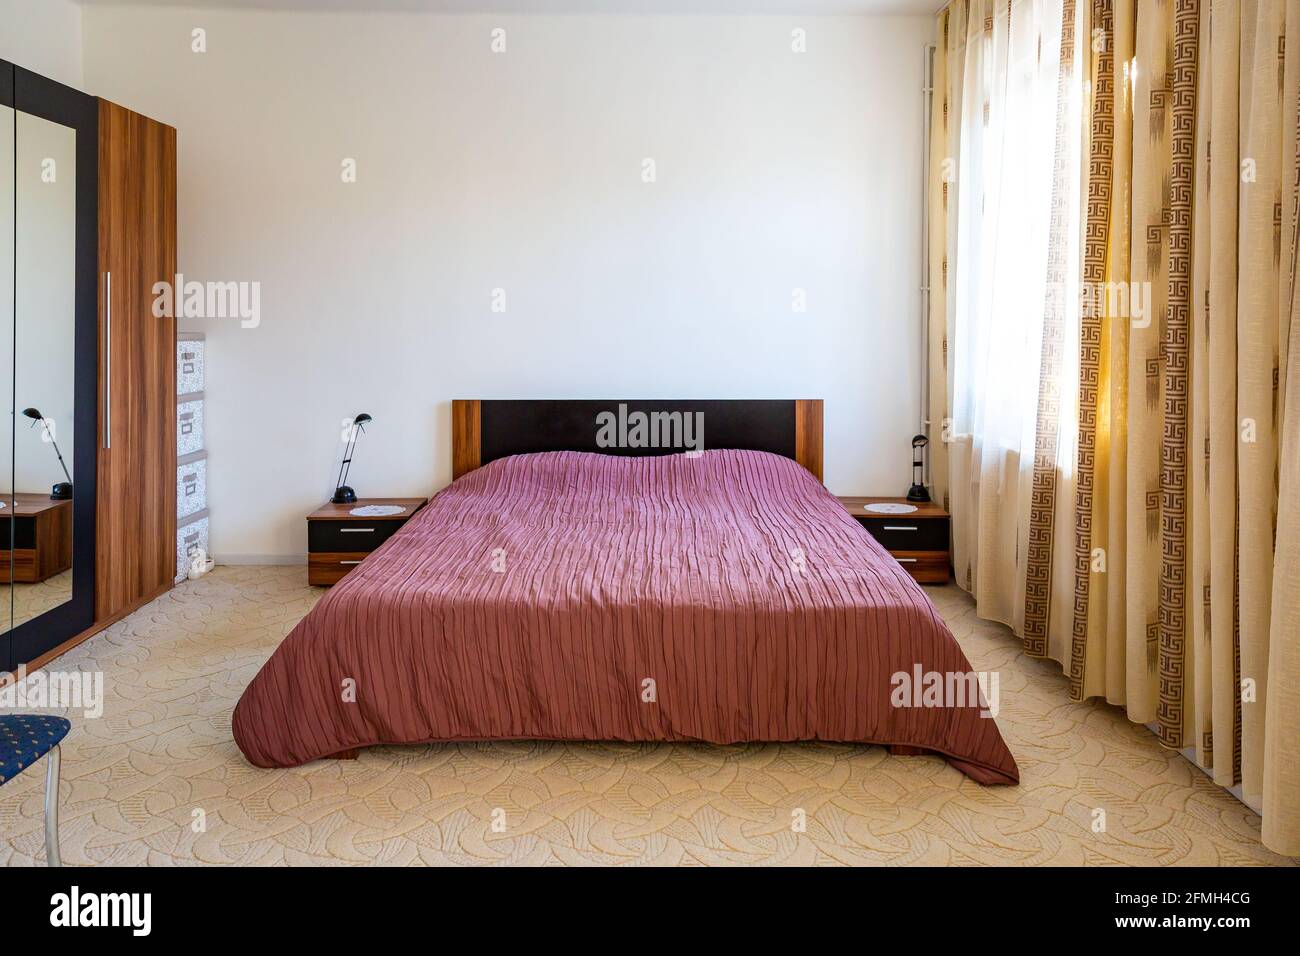 Cozy bedroom interior with wide double bed covered with pink bedspread. Stock Photo